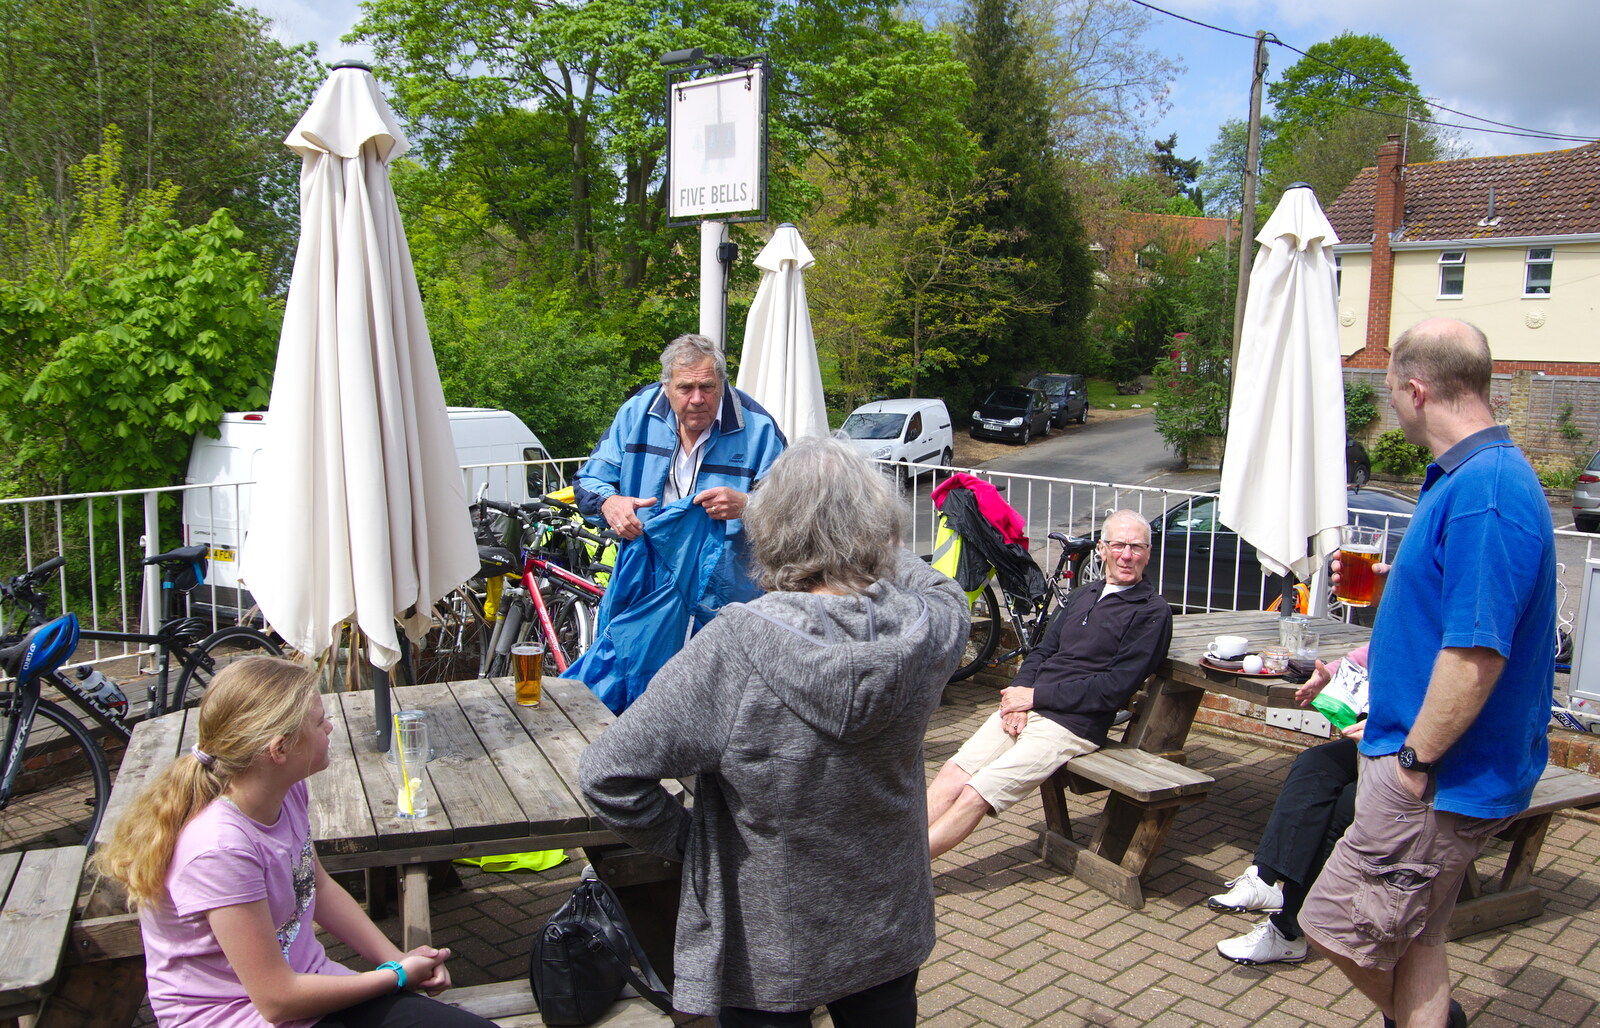 The BSCC Bike Ride 2019, Coggeshall, Essex - 11th May 2019: Alan gets his coat